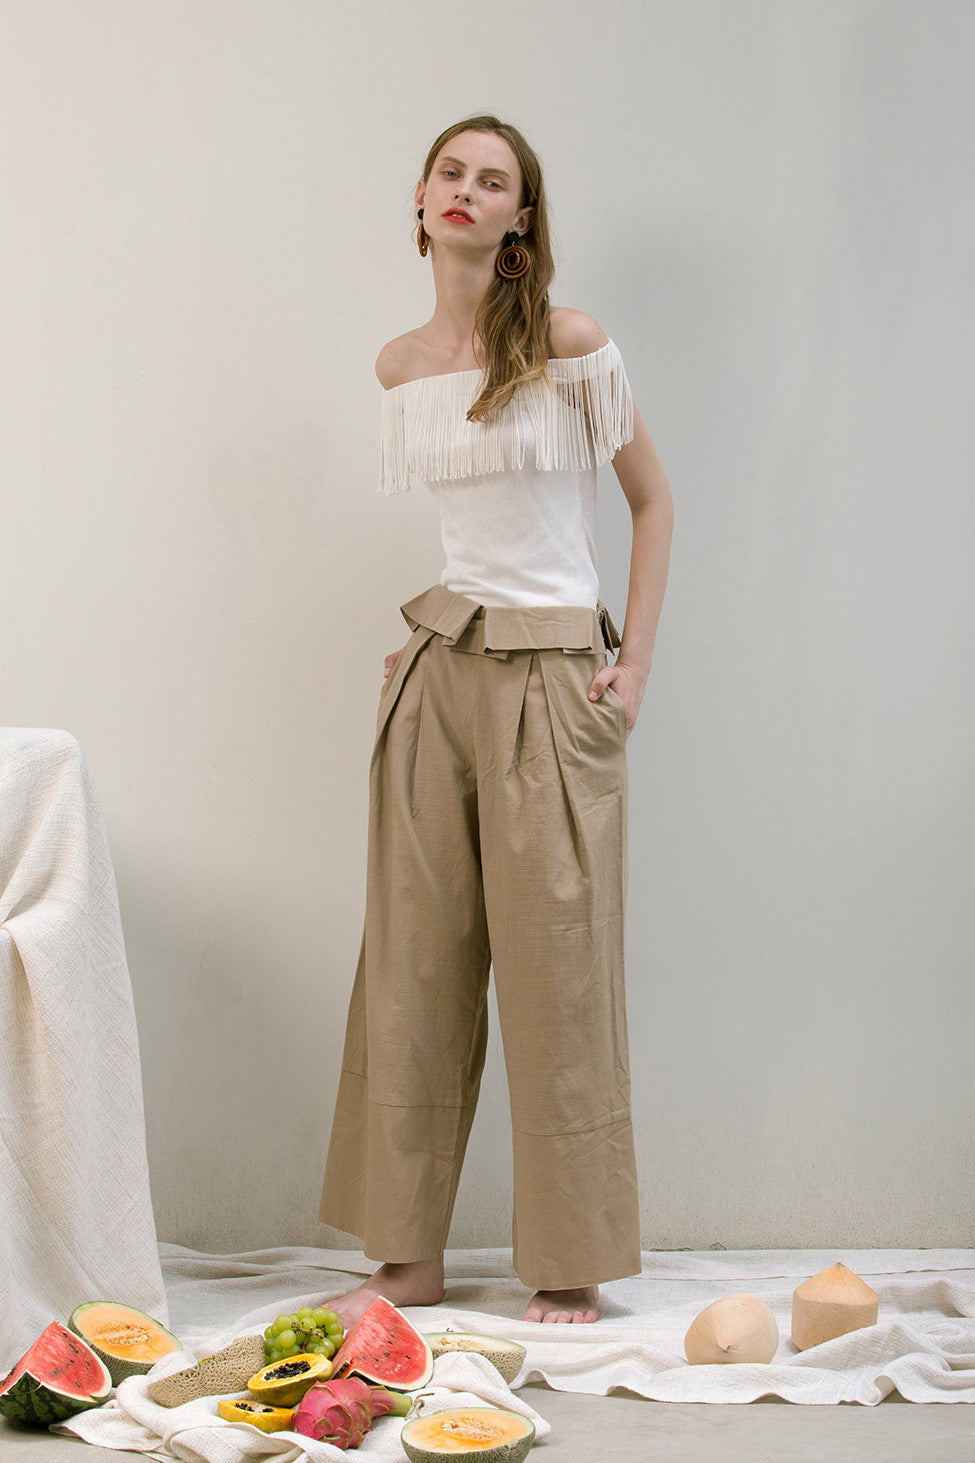 The Noelle Pant in brown featuring pleated front with origami design, two slant pockets. Lightweight.